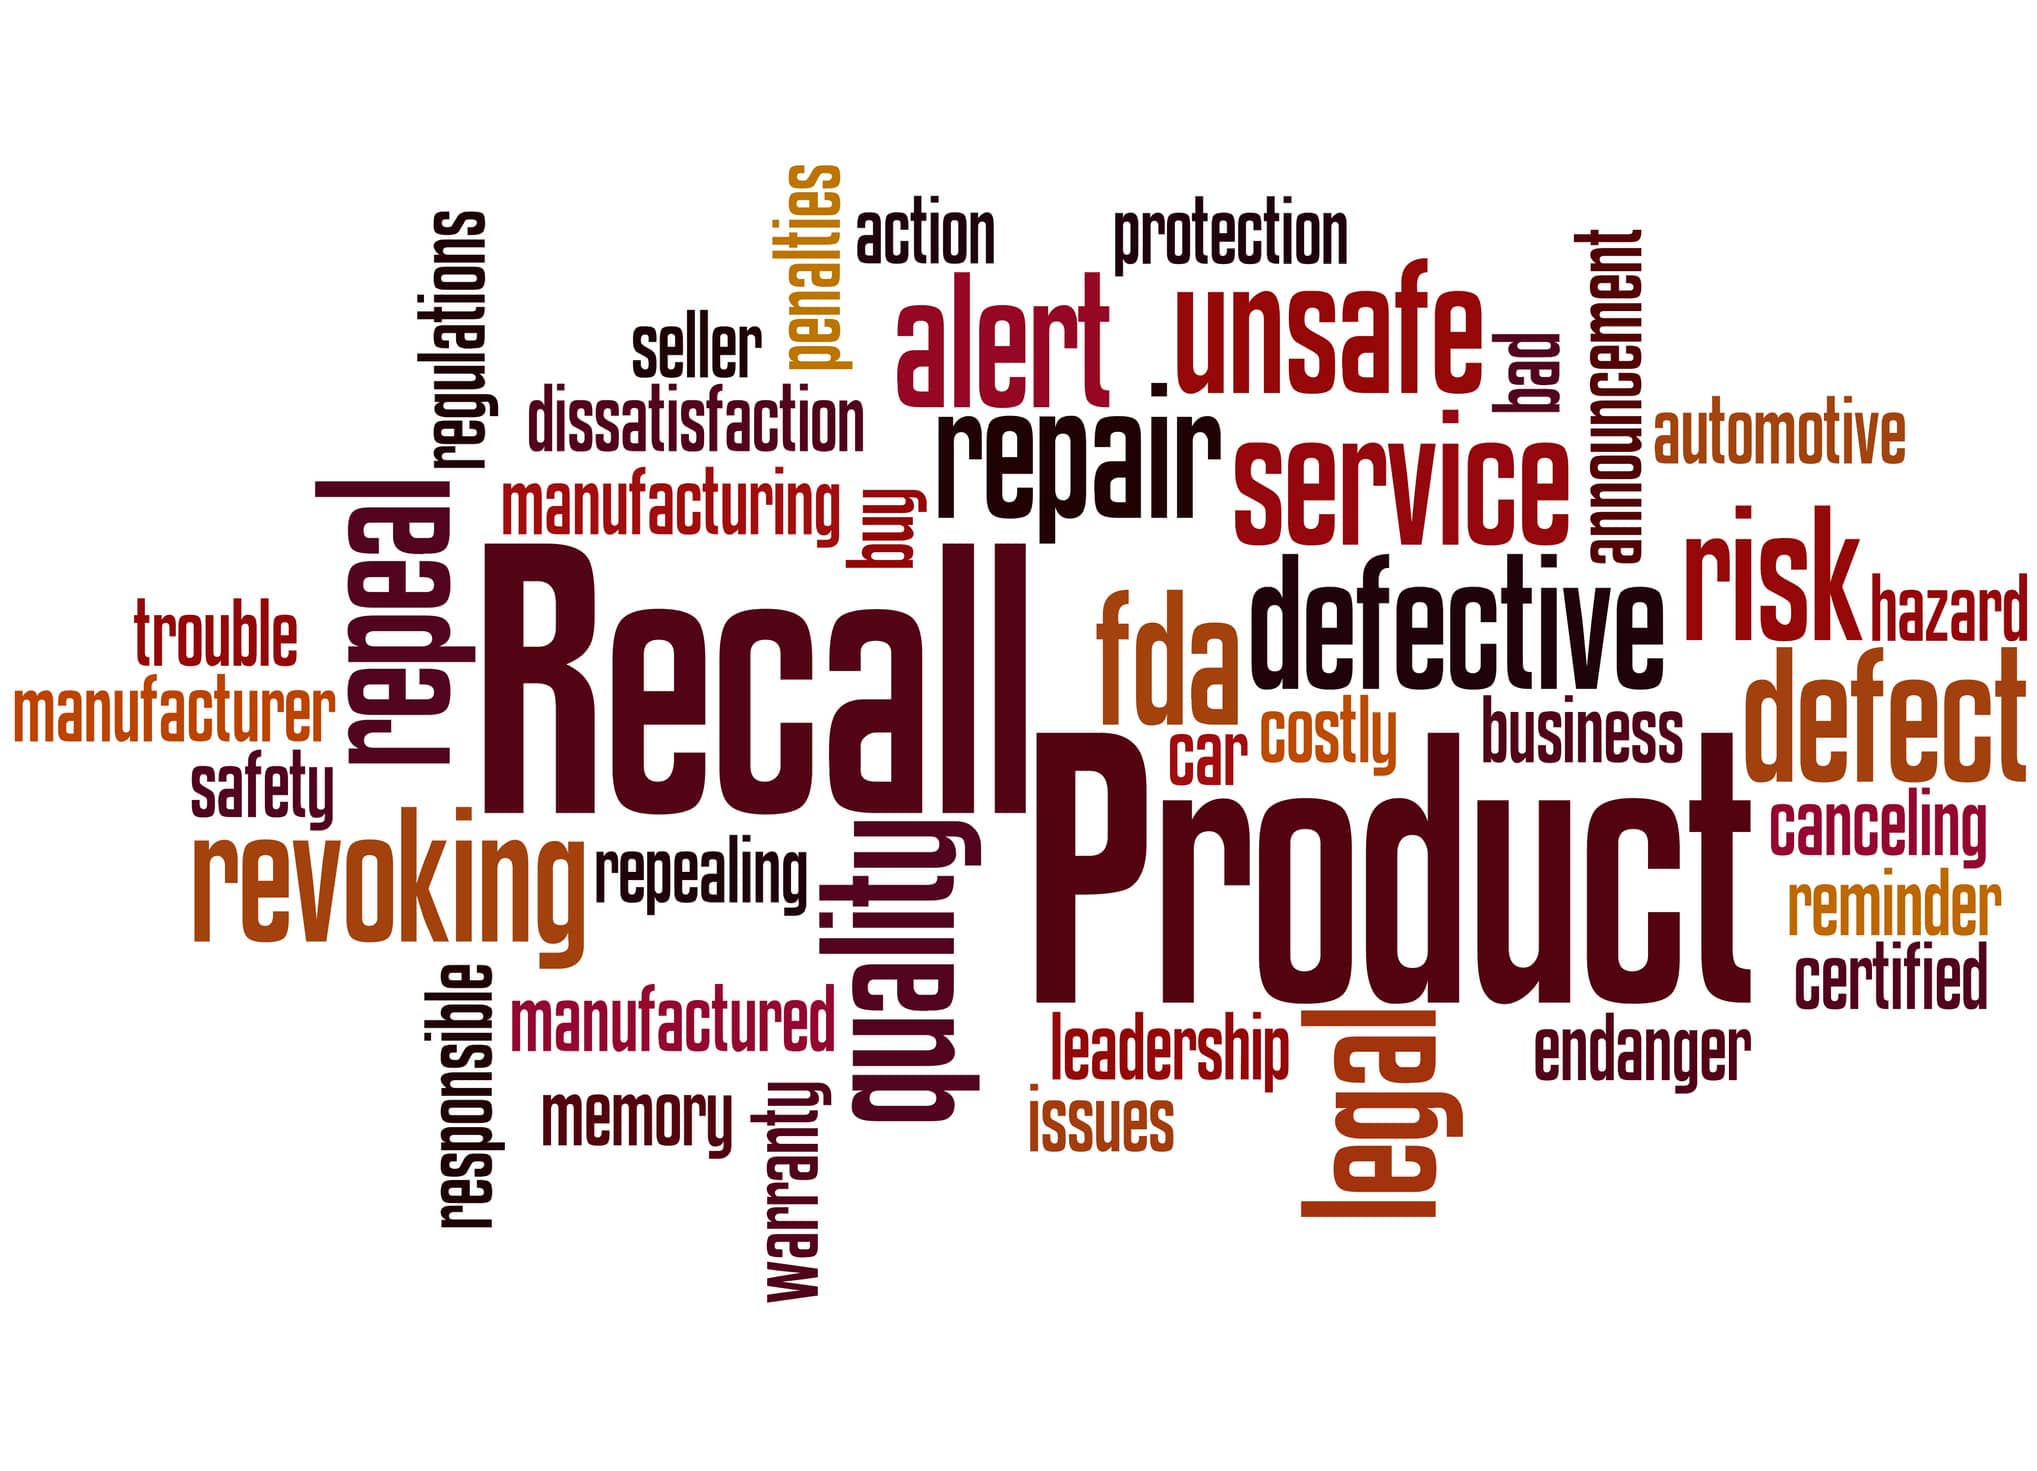 12 Tips for Creating an Effective Product Recall Plan - recall management software services and solutions